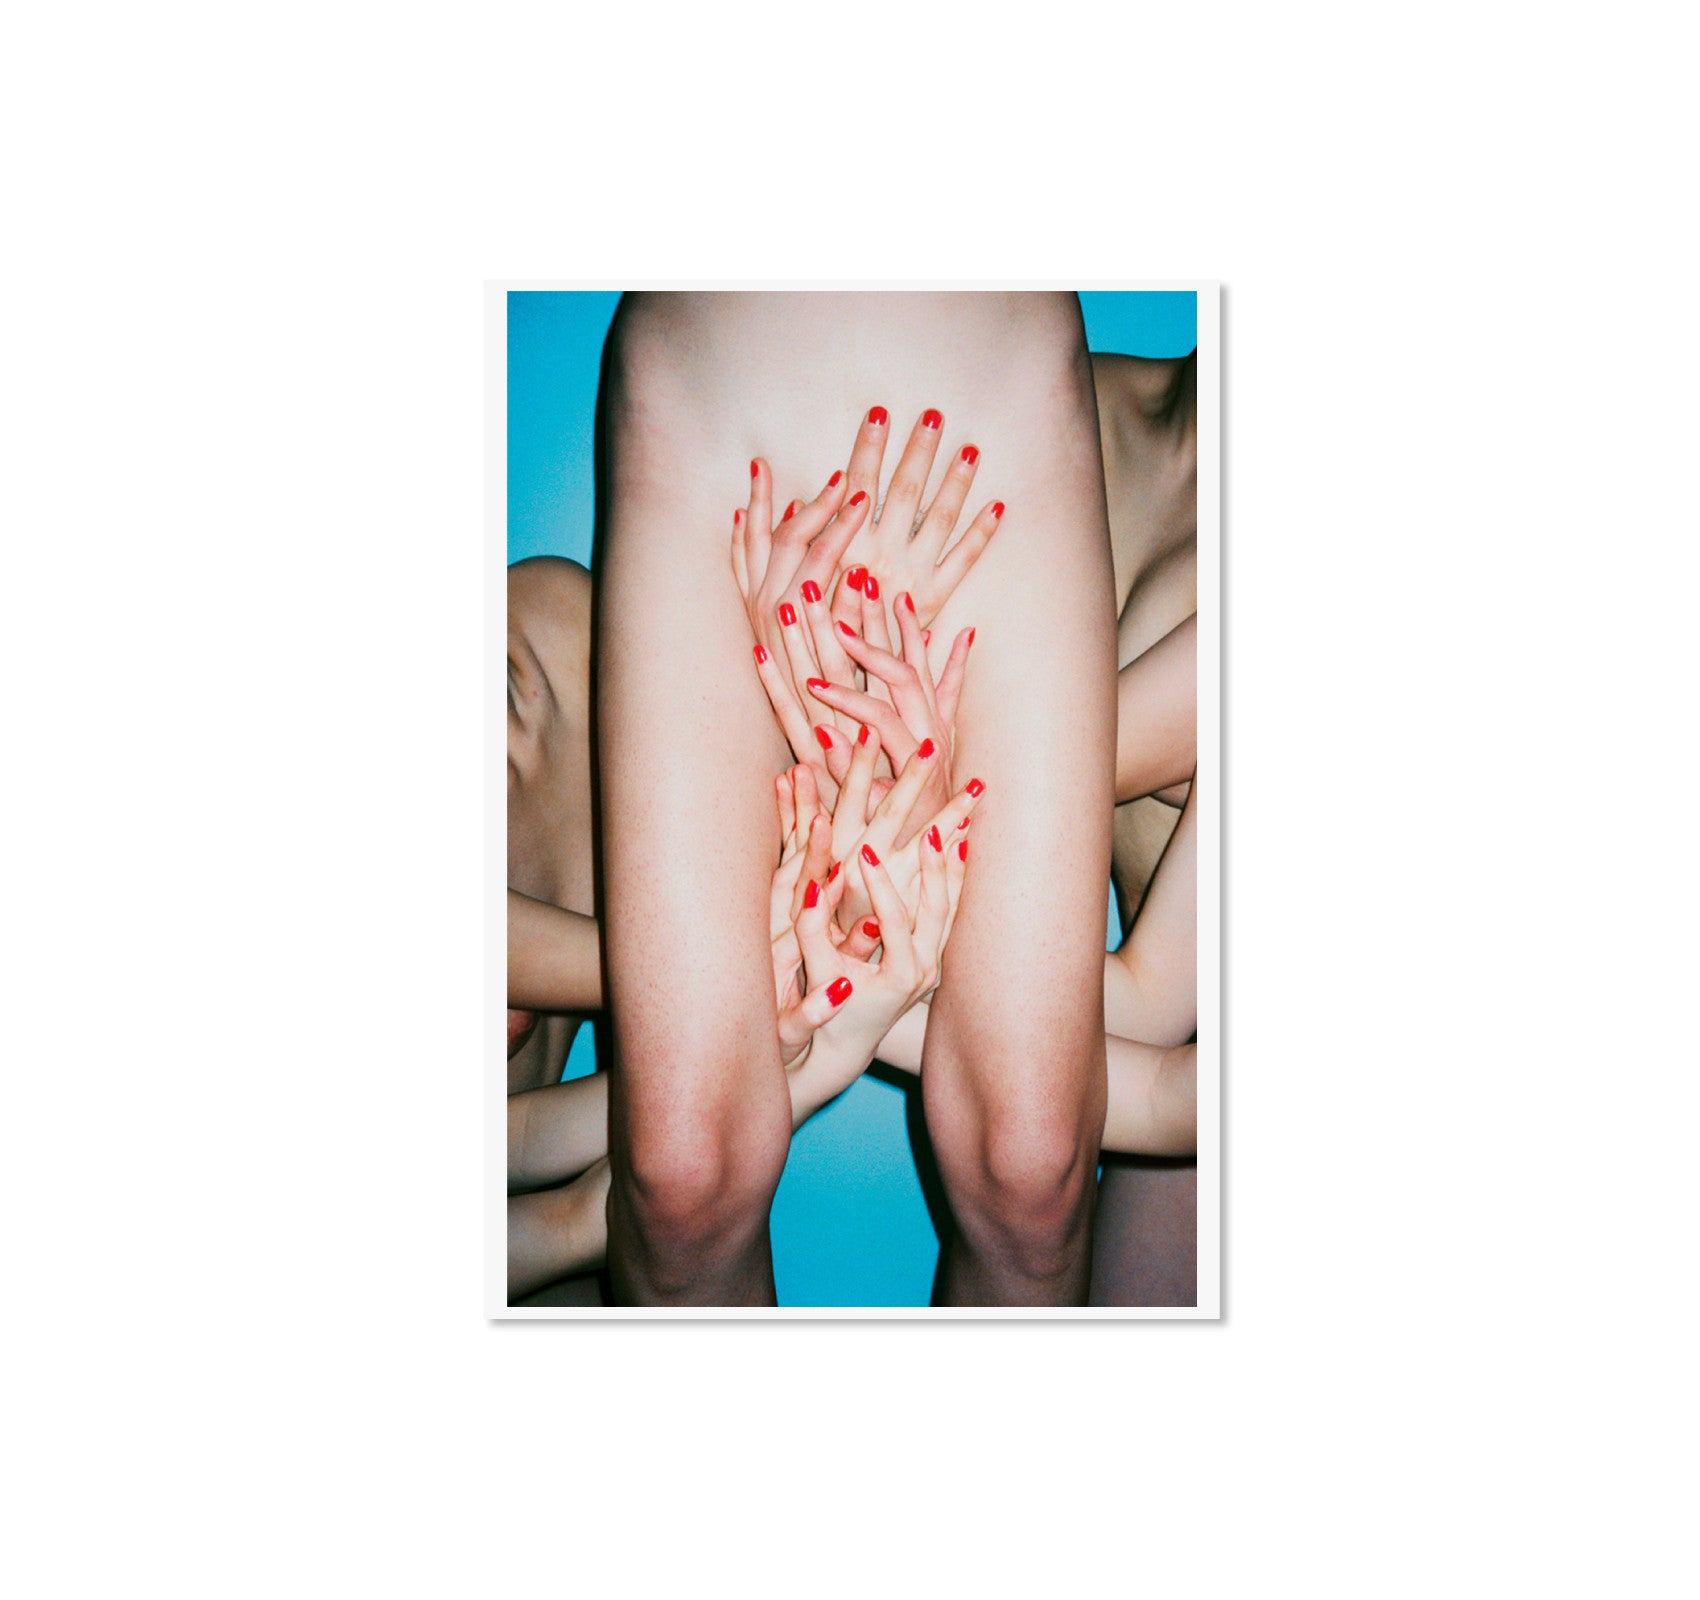 UNTITLED by Ren Hang [FRAMED / EXCLUSIVE]